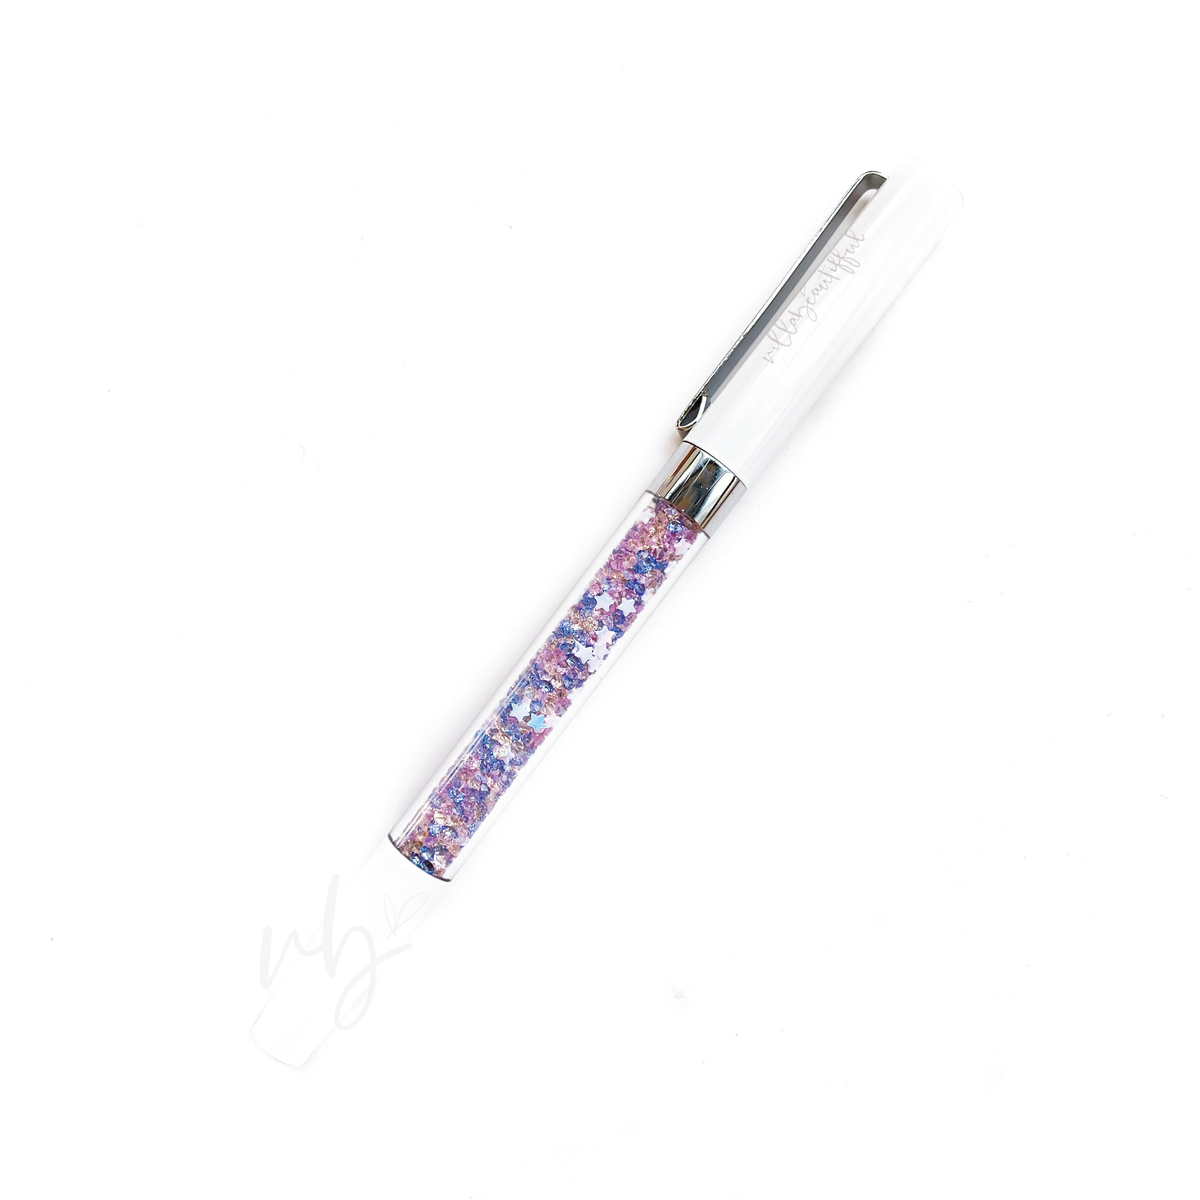 Gertie Imperfect Crystal VBPen | limited pen